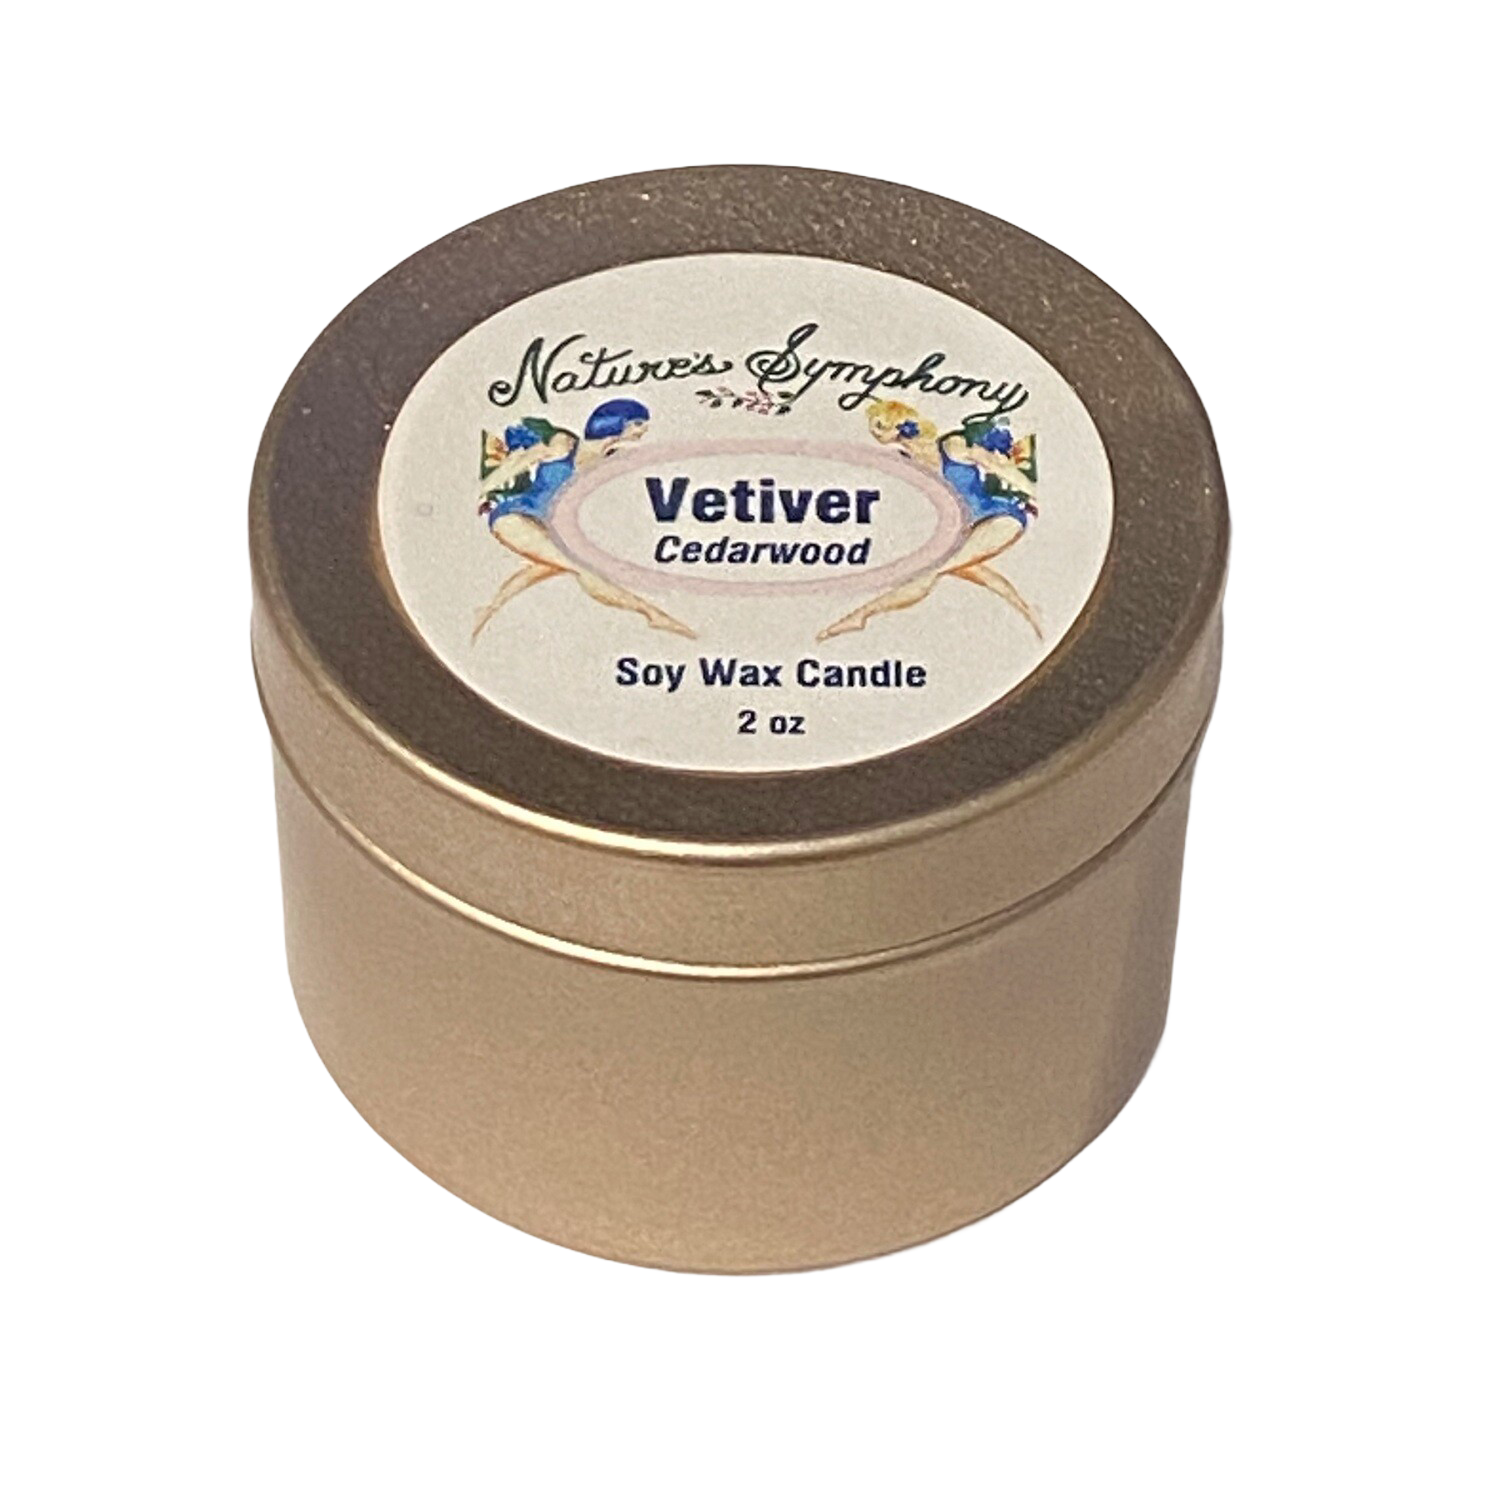 Vetiver Cedarwood, Soy Candle, in covered tin container - 2oz (56g)